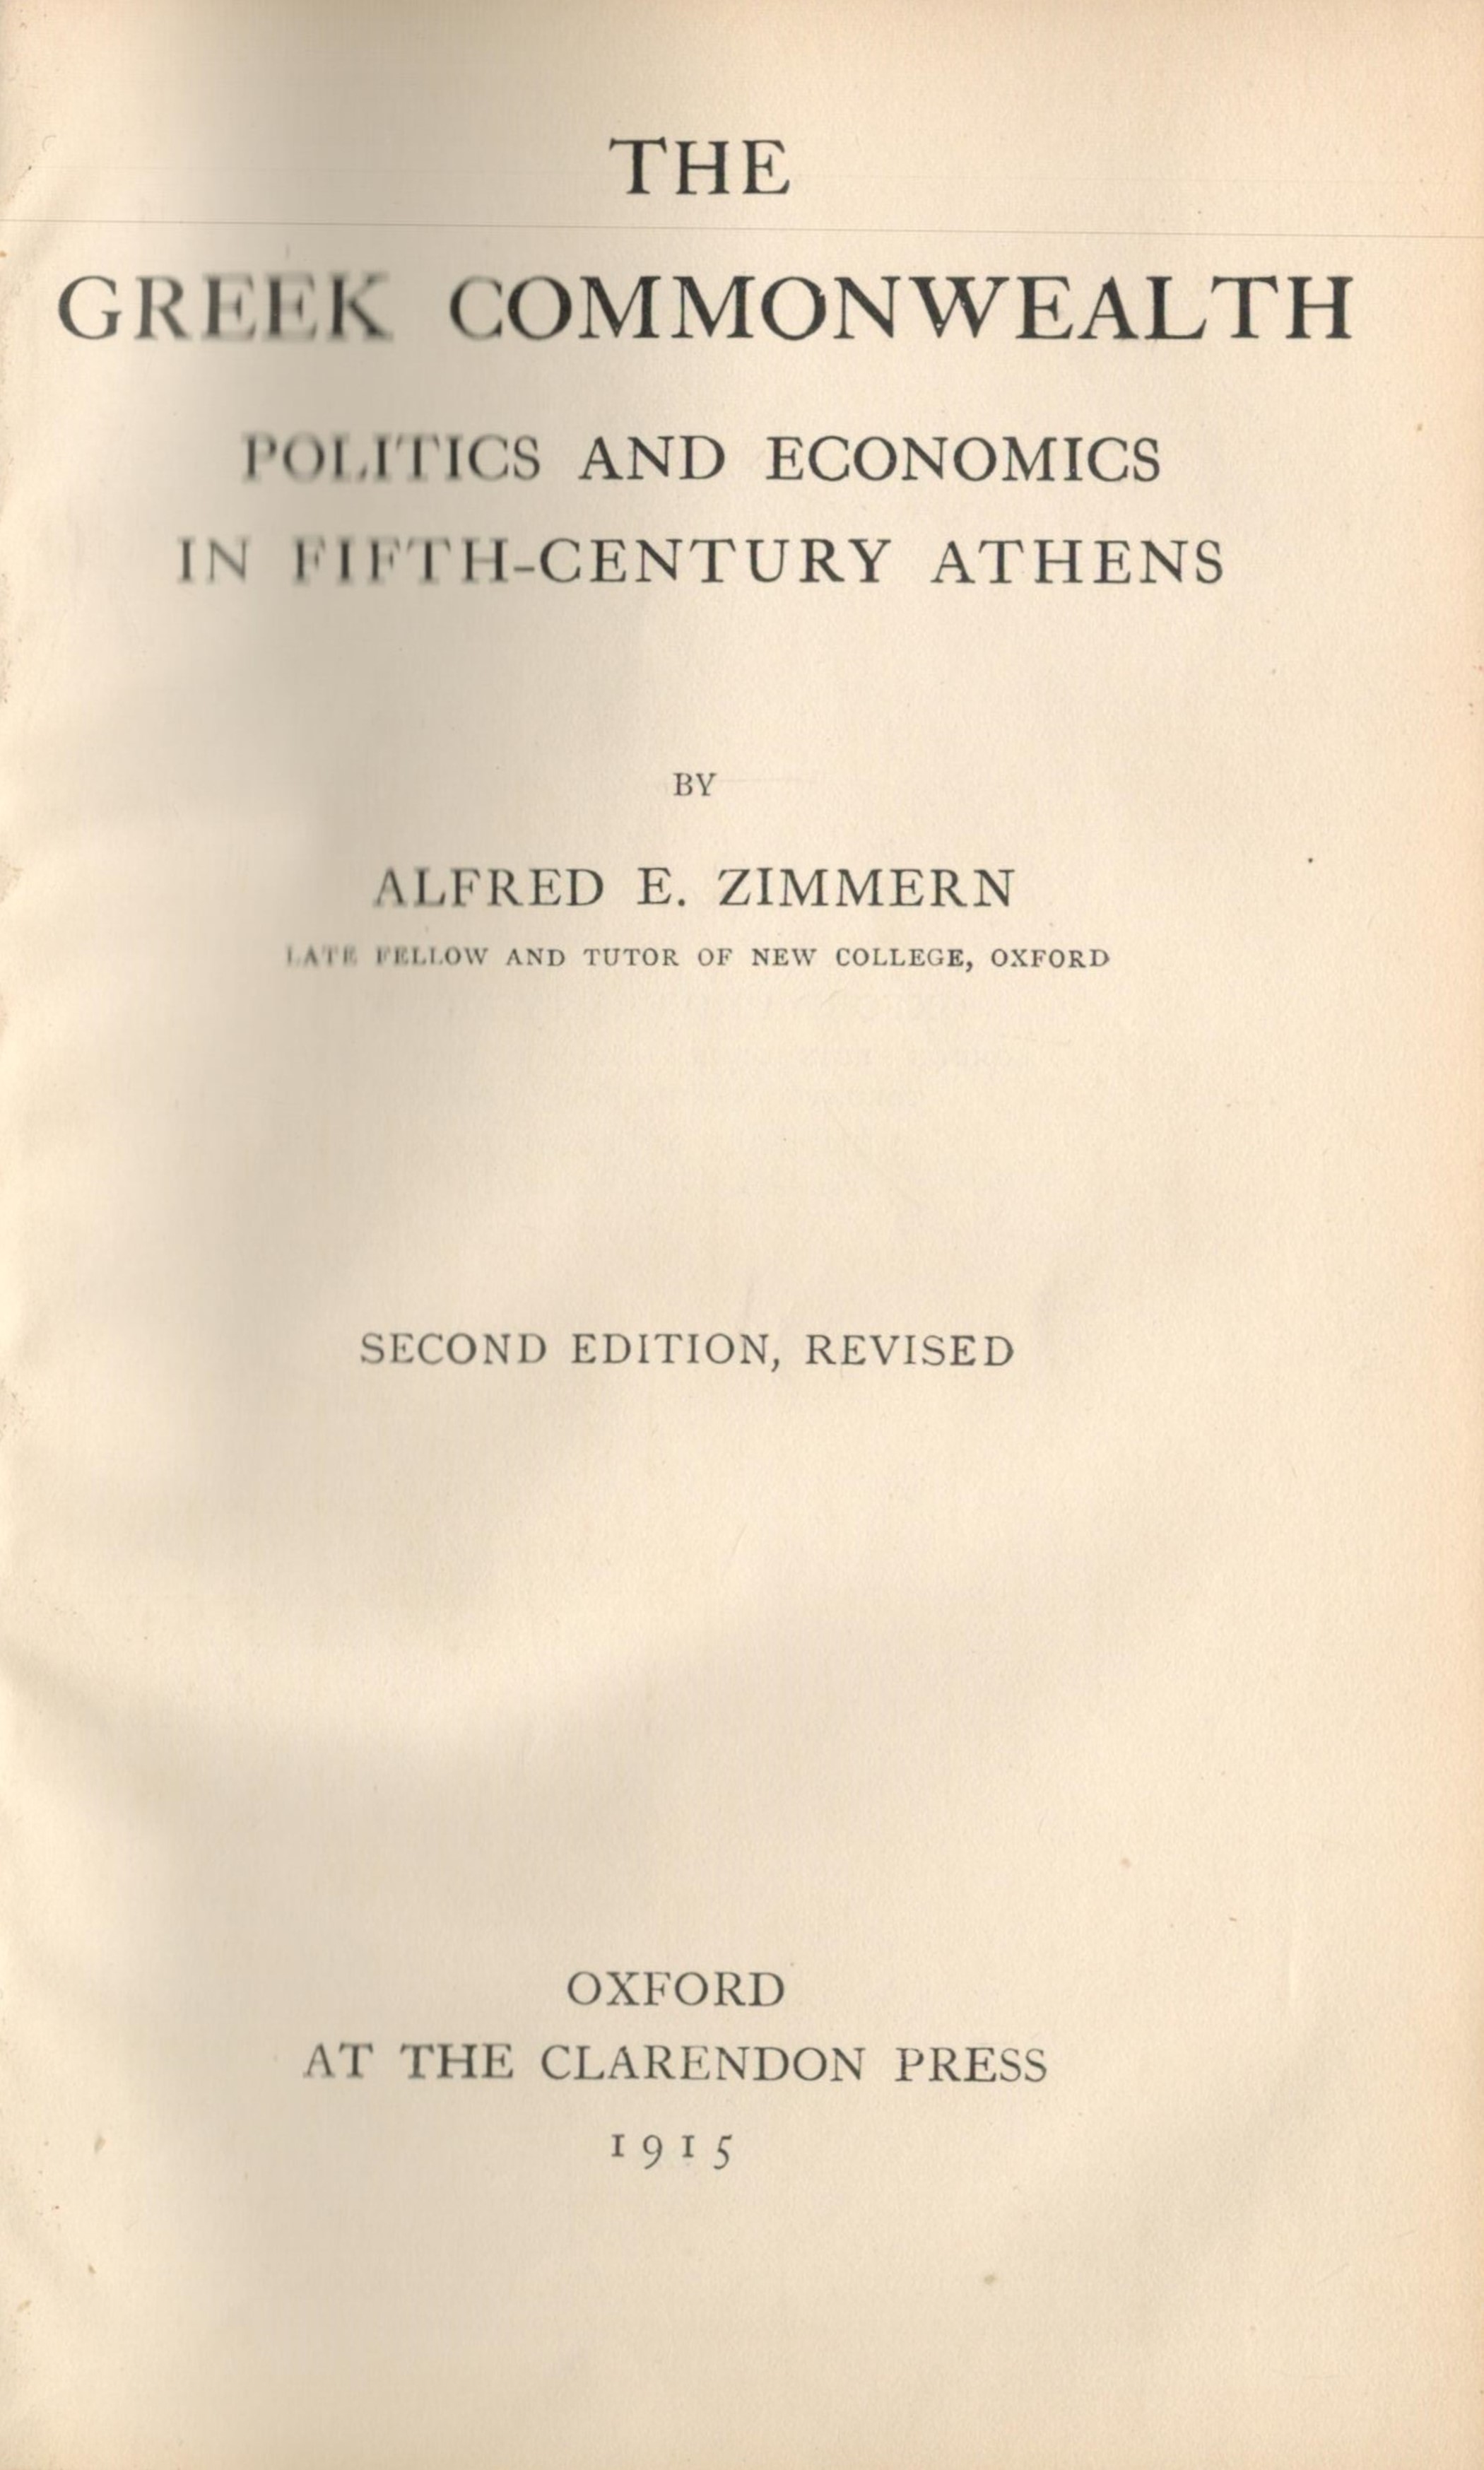 The Greek Commonwealth Politics and Economics in Fifth-Century Athens by Alfred E Zimmern 1915 - Image 2 of 3